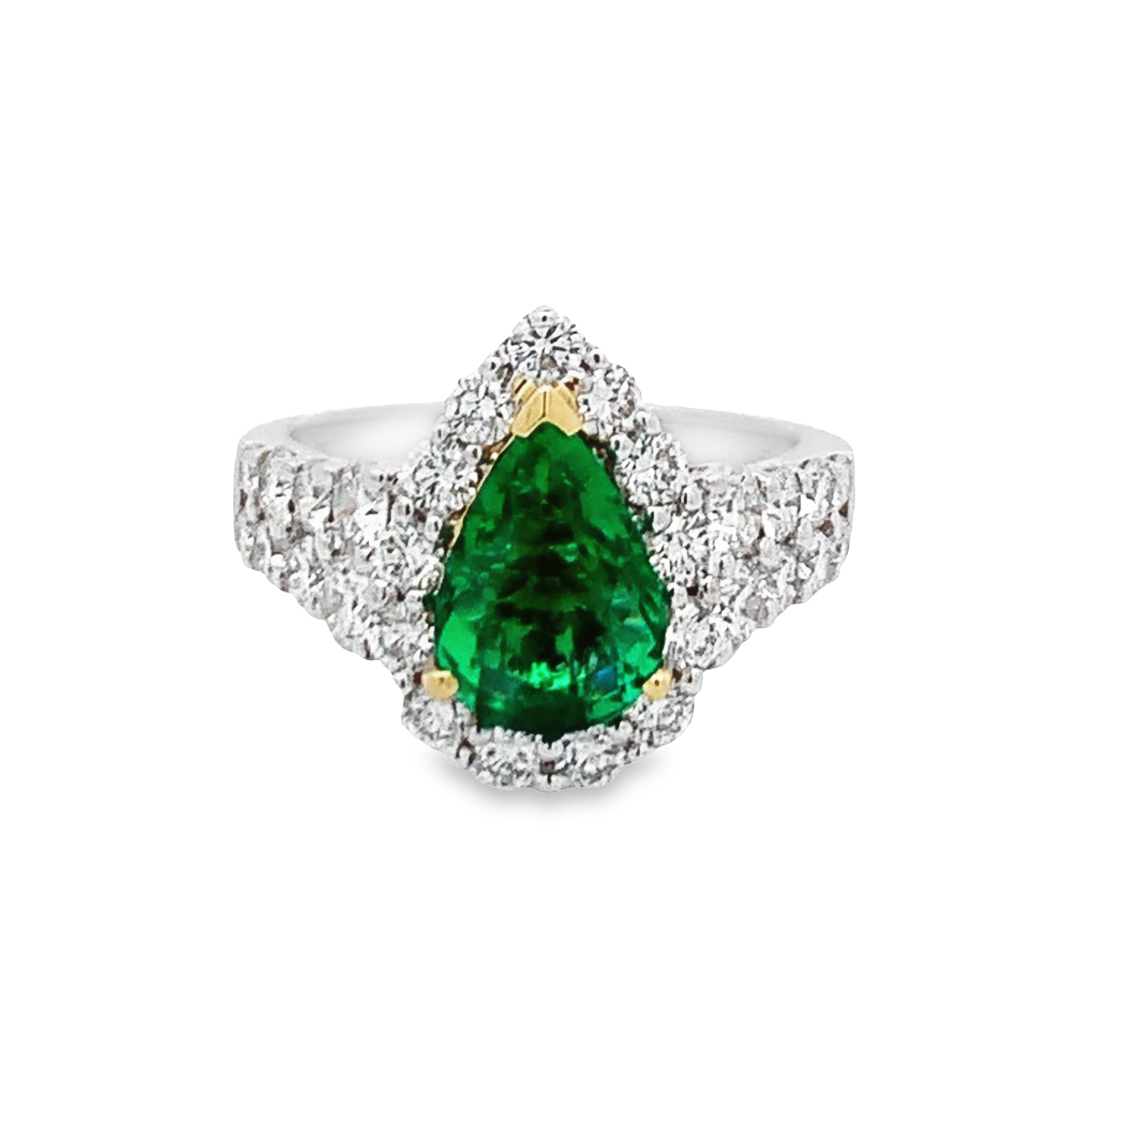 14K White Gold Emerald and Diamond Ring Size 6.5